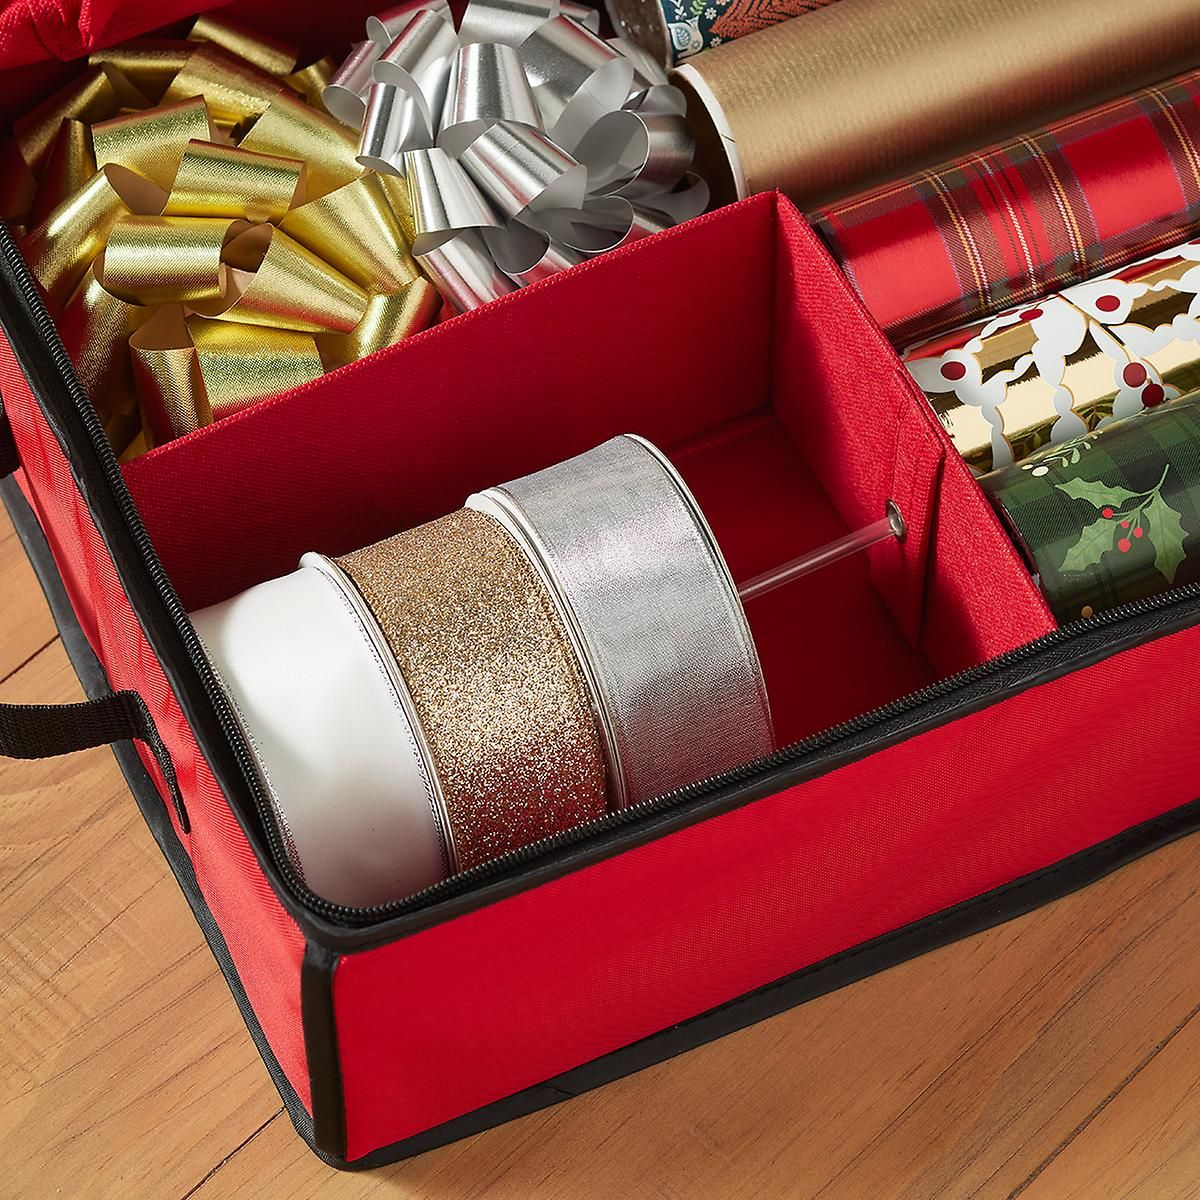 Wrapping Paper Storage Case | The Container Store